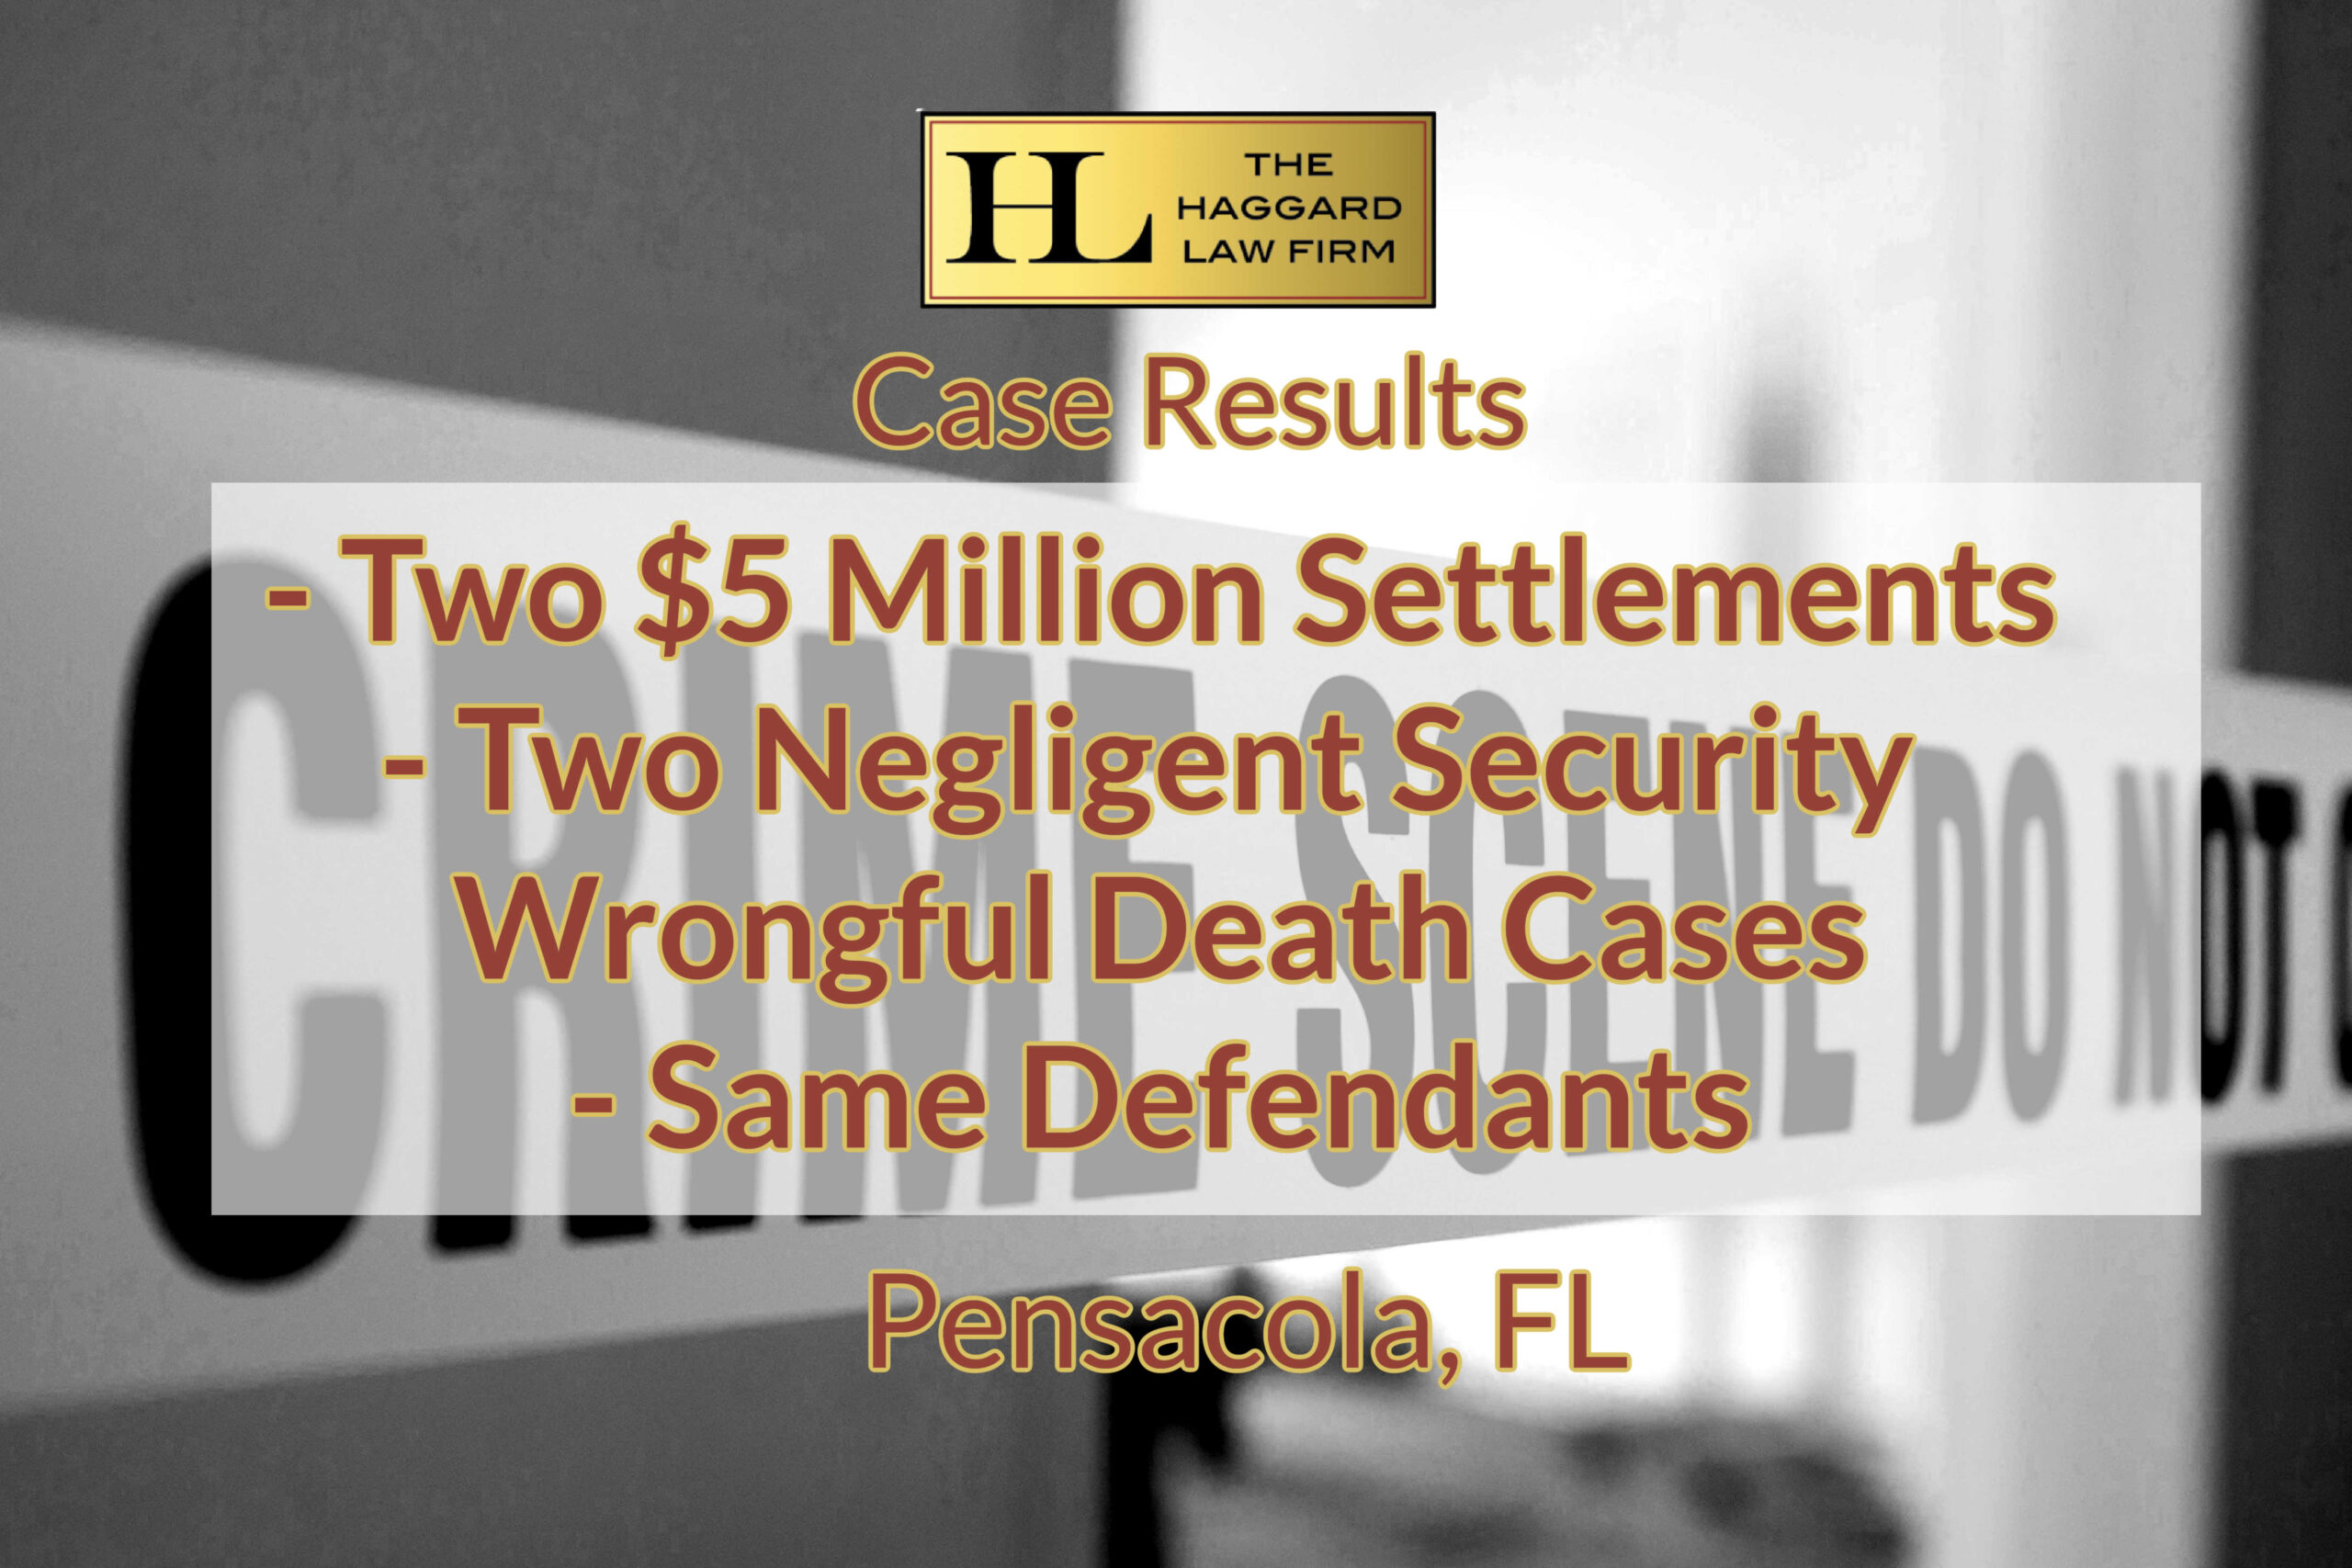 Two $5 Million Settlements, Two Cases, Two Properties, One City, Same Defendant